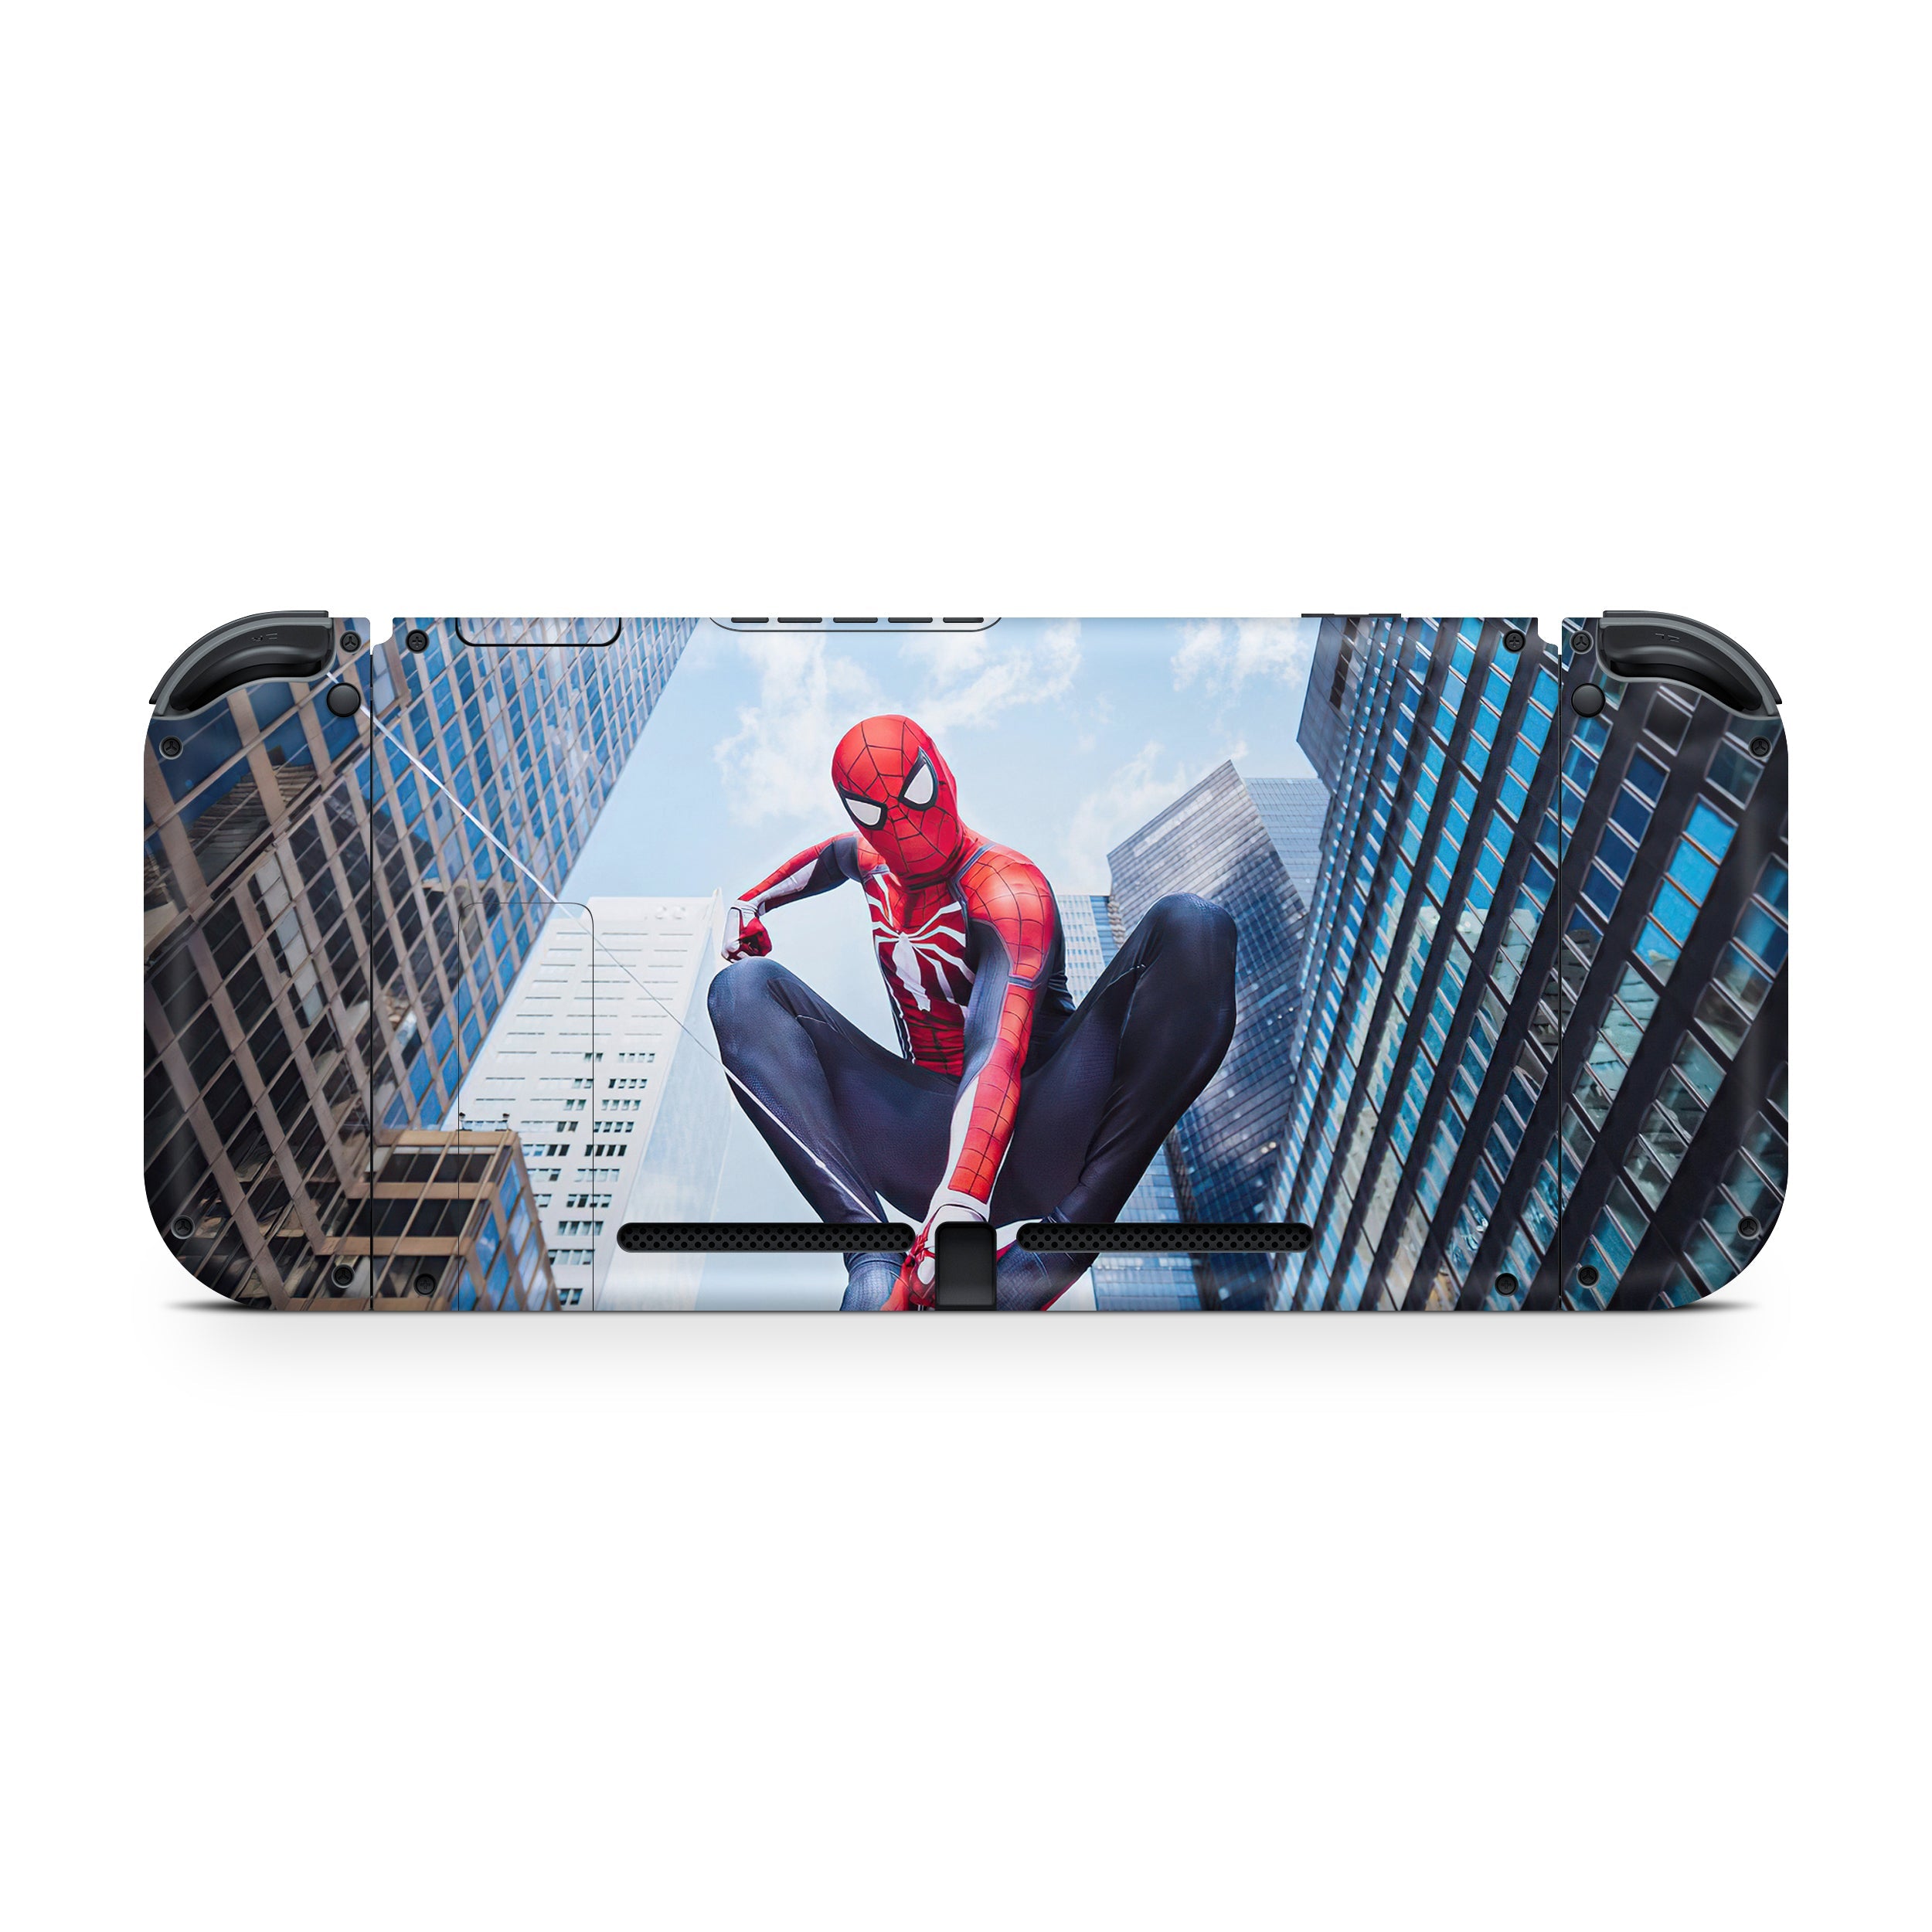 A video game skin featuring a Marvel Comics Spider Man design for the Nintendo Switch.